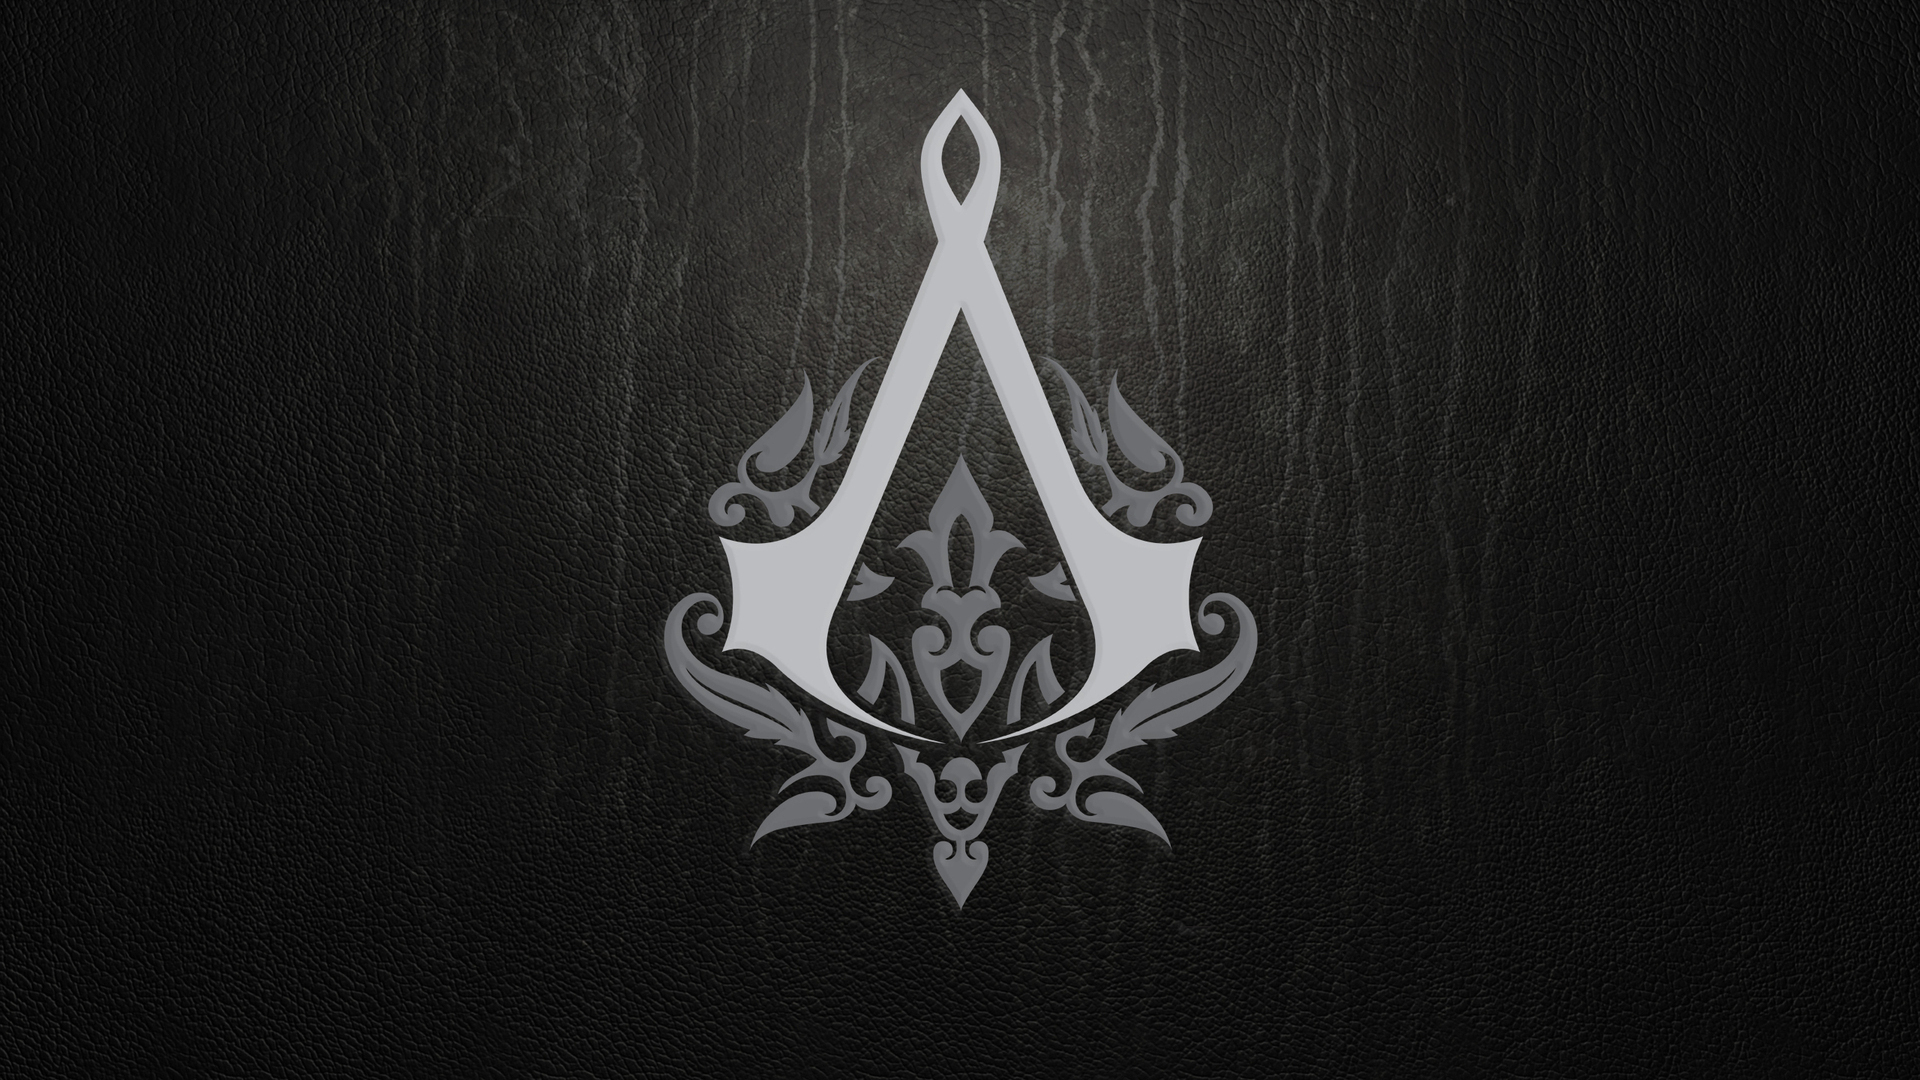 Wallpaper By Assassins The Assassin S Creed Wiki